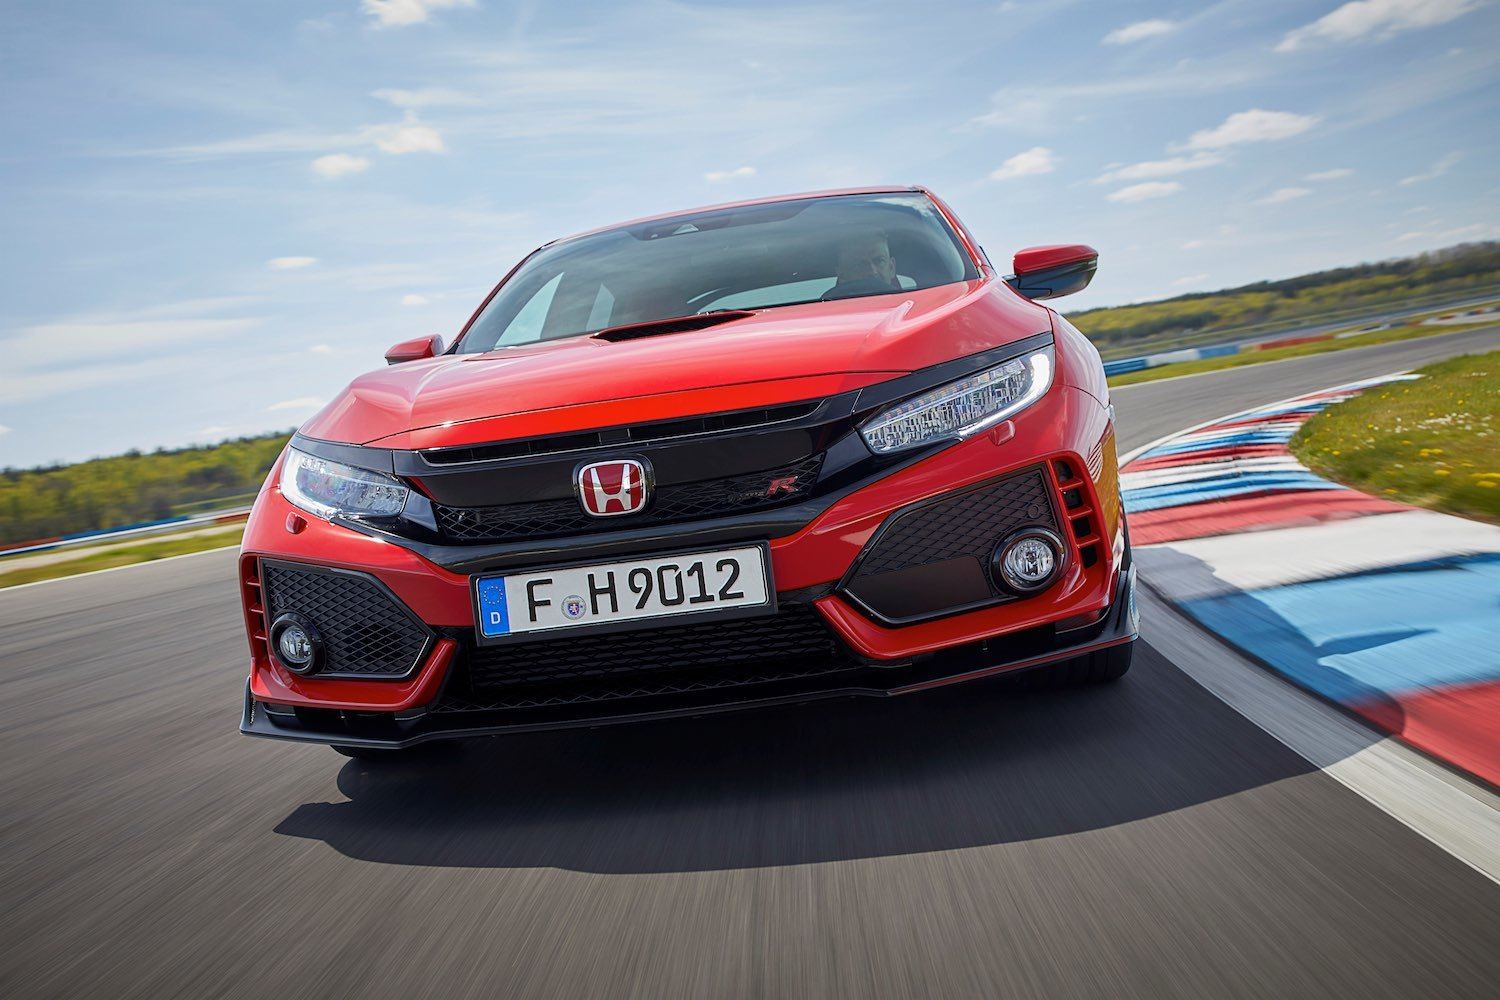 Tim Barnes-Clay reviews the 2018 Honda Civic Type R at the first drives 5